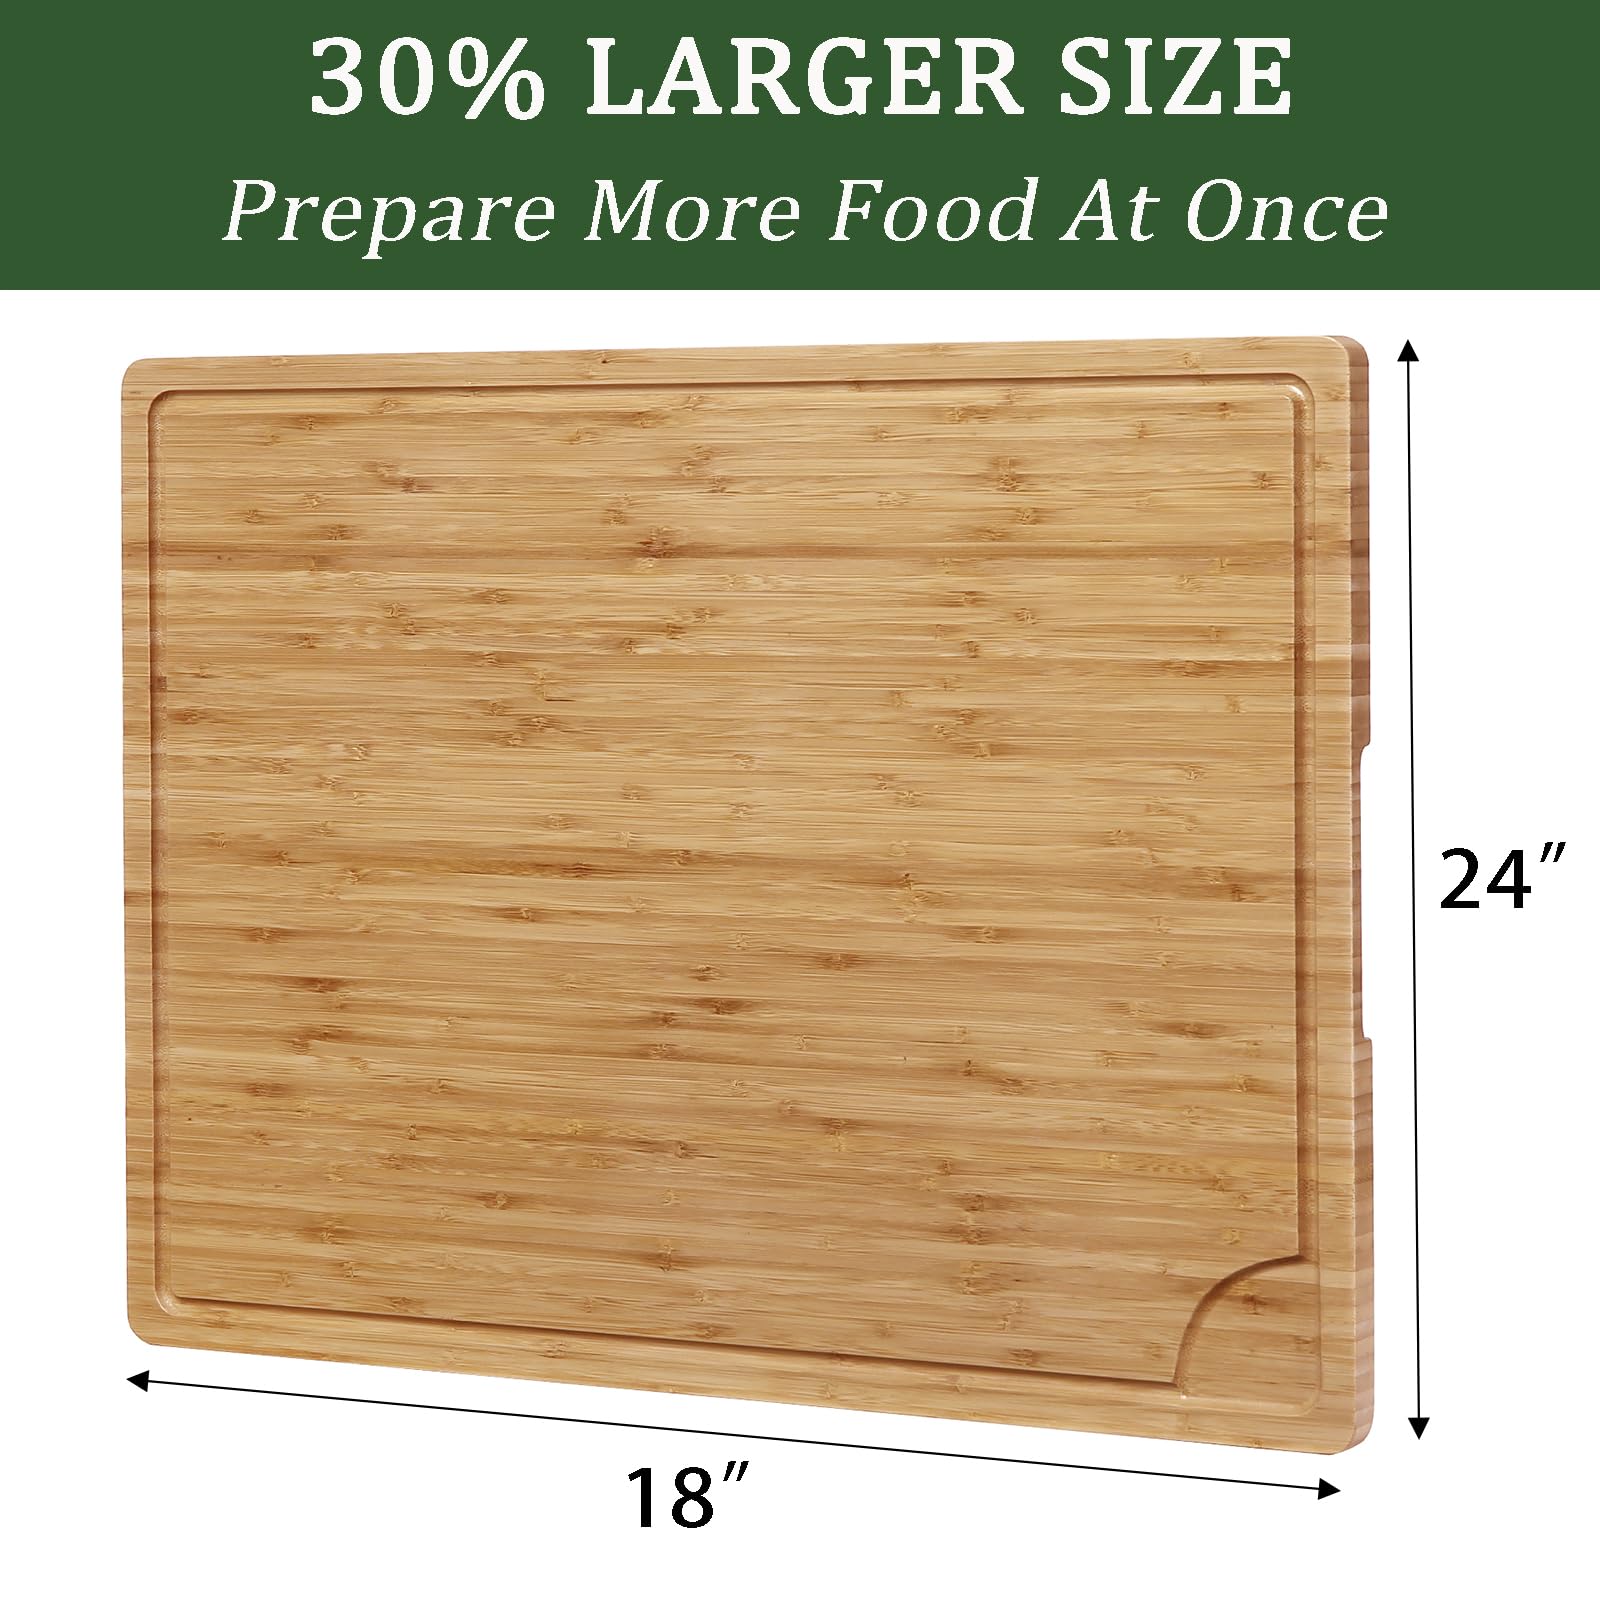 24 x 18 Bamboo Cutting Board, Large Kitchen Chopping Board for Meat, Butcher Block Cutting Board, Carving Board with Handle and Juice Groove for Turkey, Meat, Vegetables, BBQ